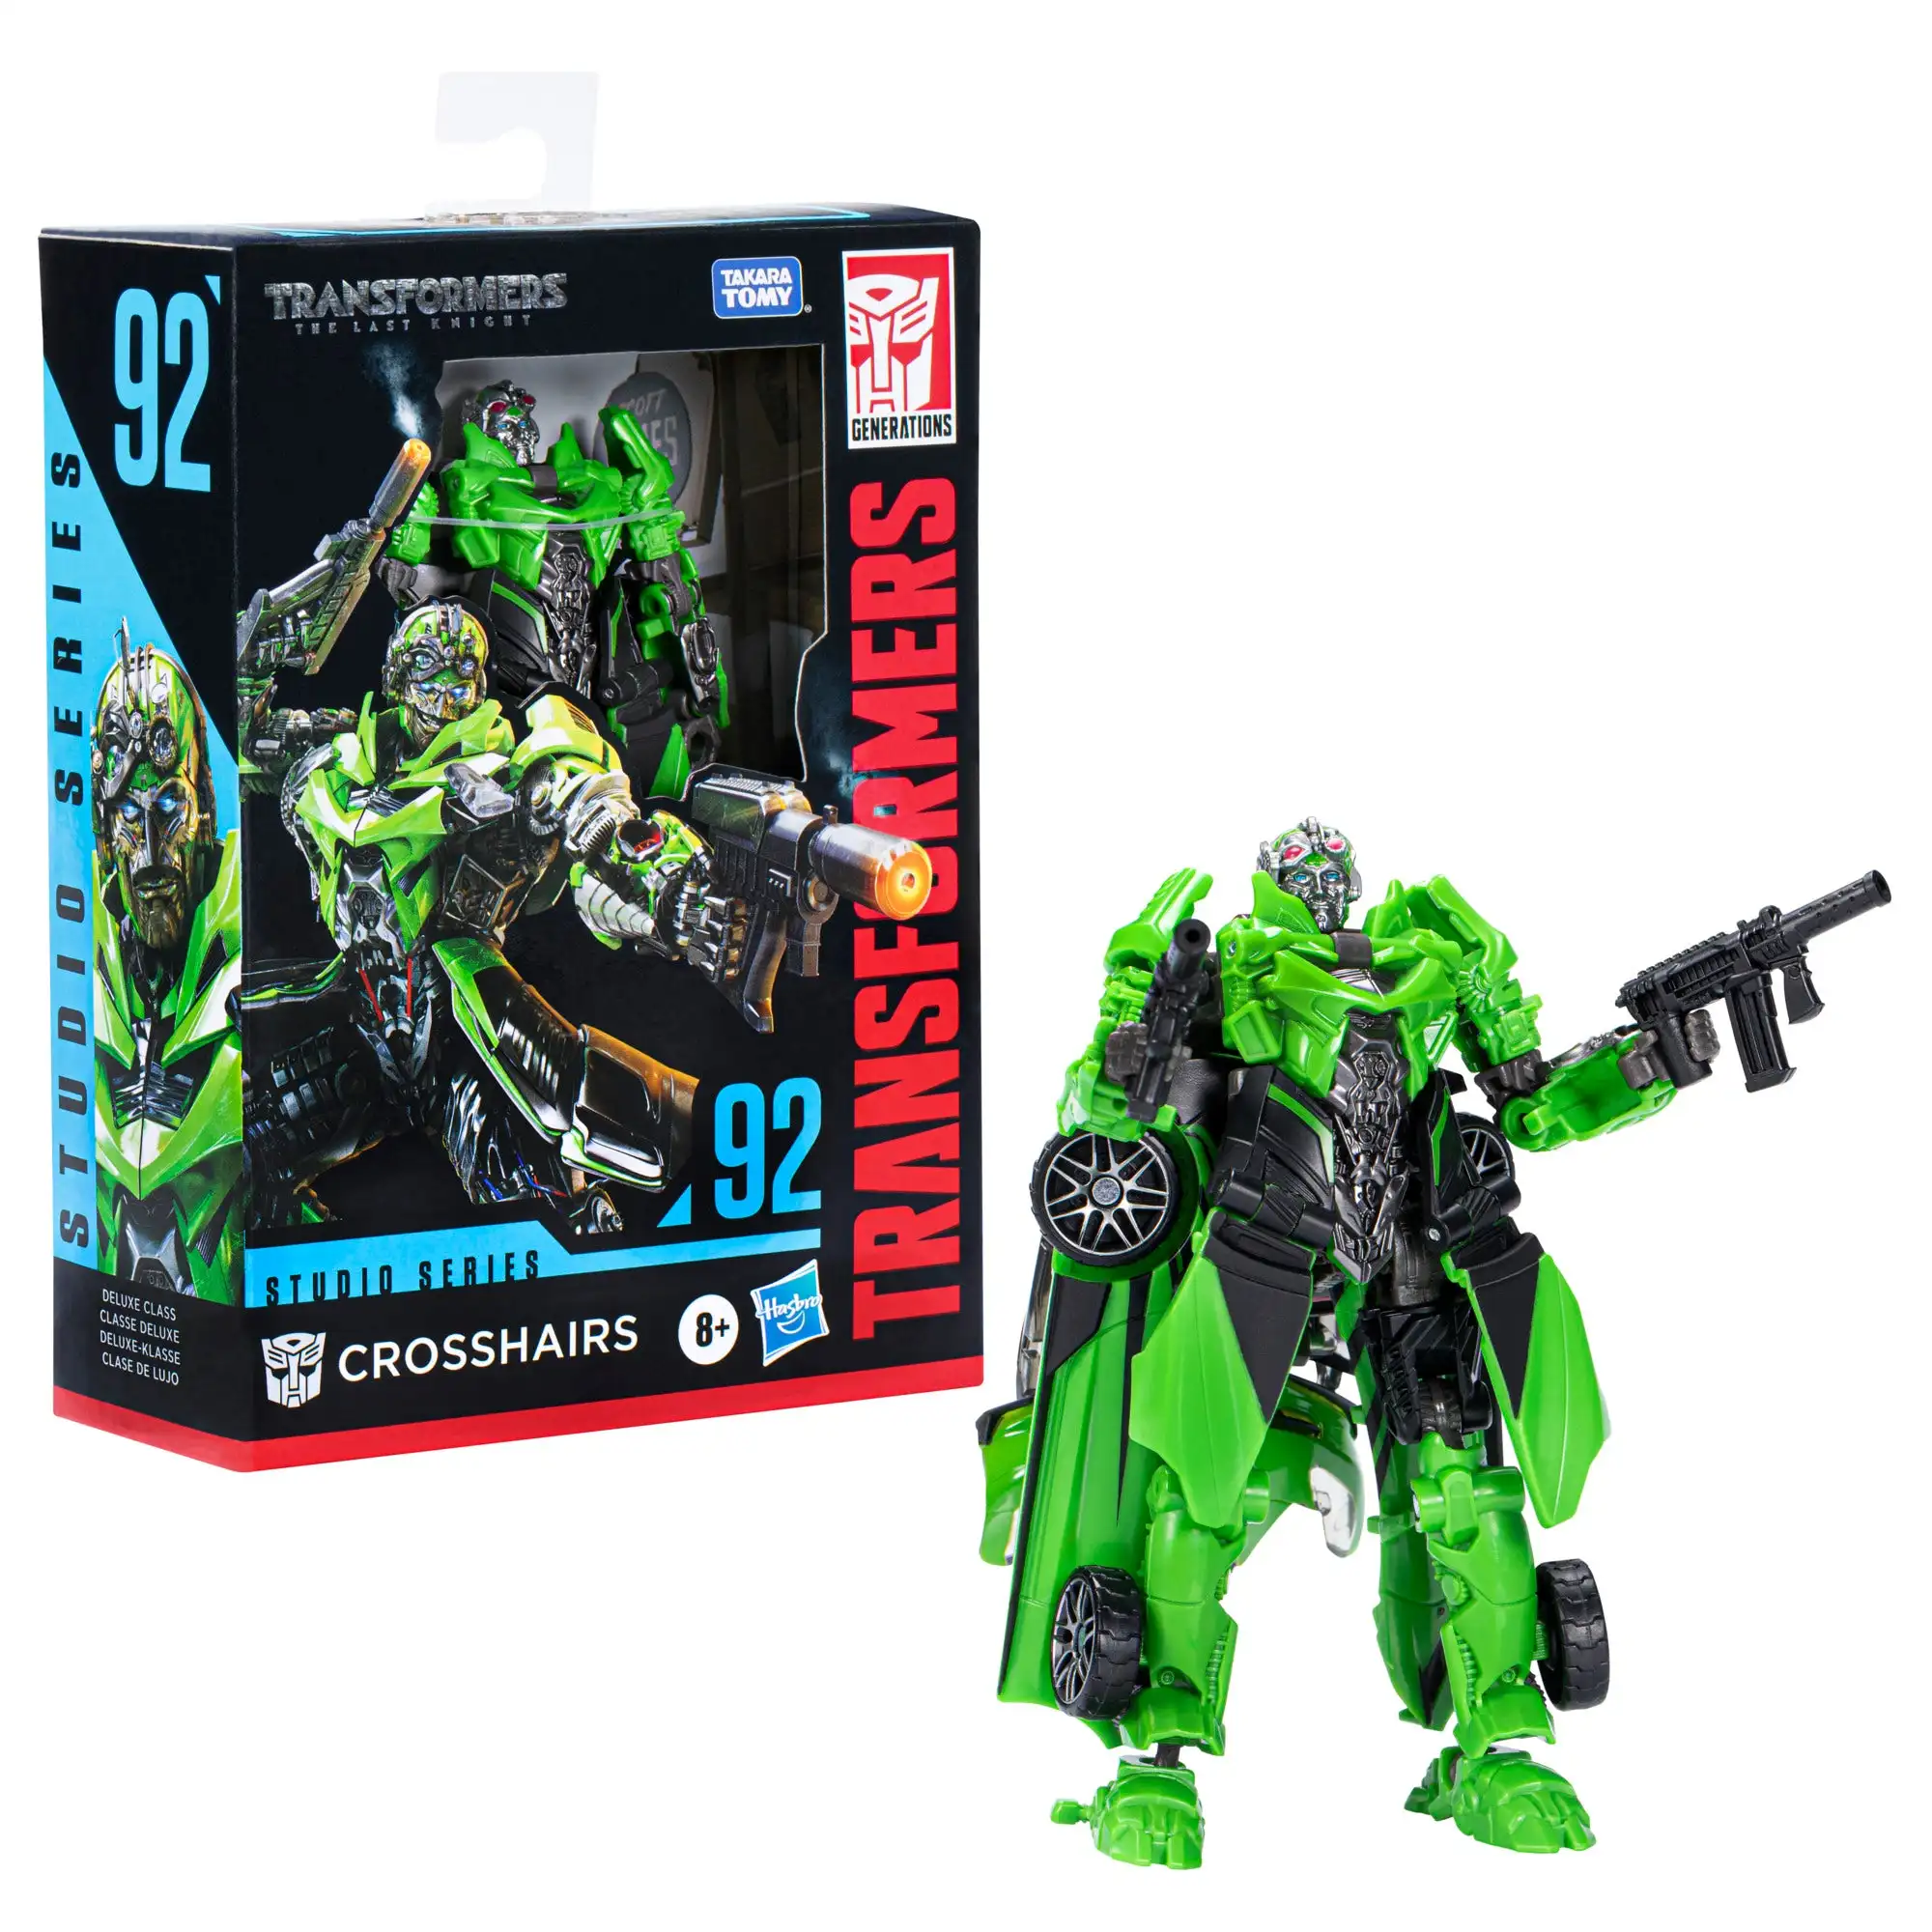 

Hasbro Transformers Studio Series 92 Deluxe The Last Knight Crosshairs Action Figure Collectible Toys for Birthday Gift F3165